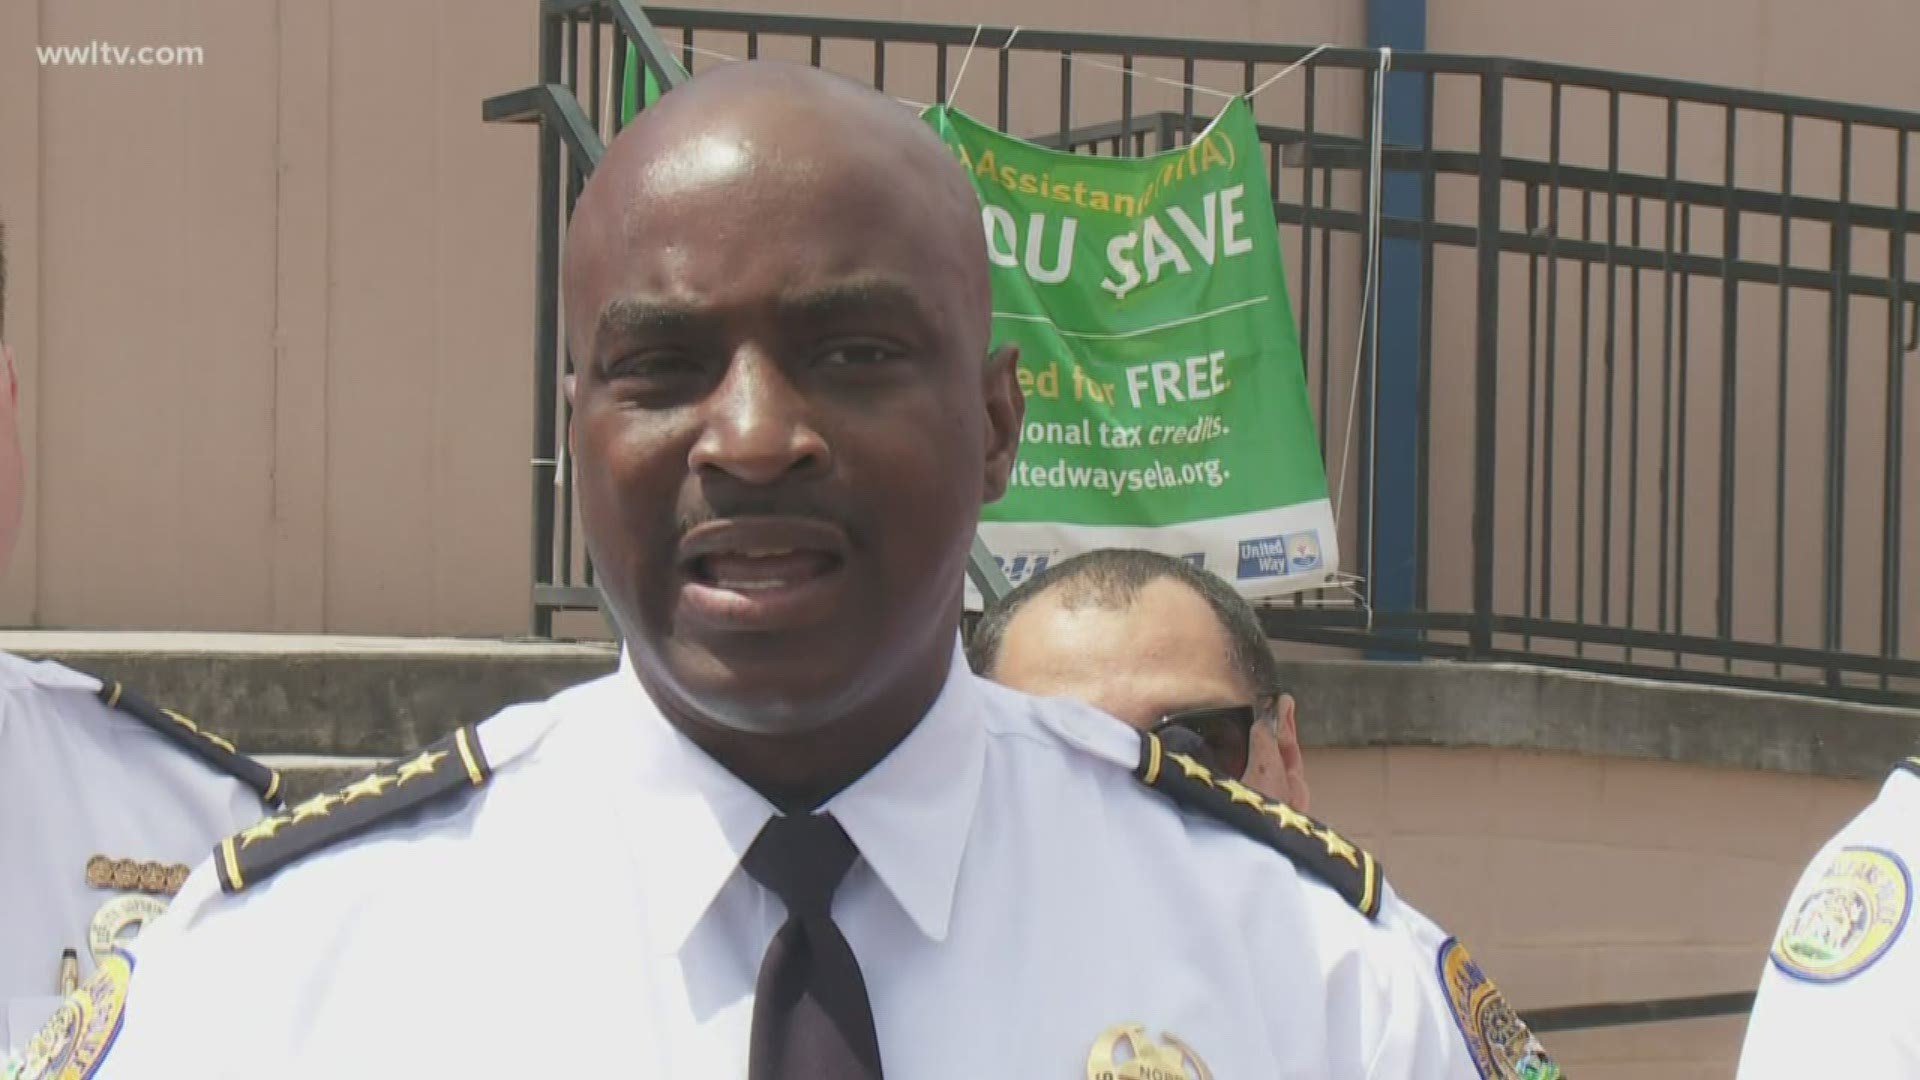 "I think this is an opportunity for me to implement my new vision for the New Orleans Police Department. I've concluded my assessment at every level. I've also prepared to restructure the department as I see and firmly believe will lead us into the future," NOPD Superintendent Shaun Ferguson said.